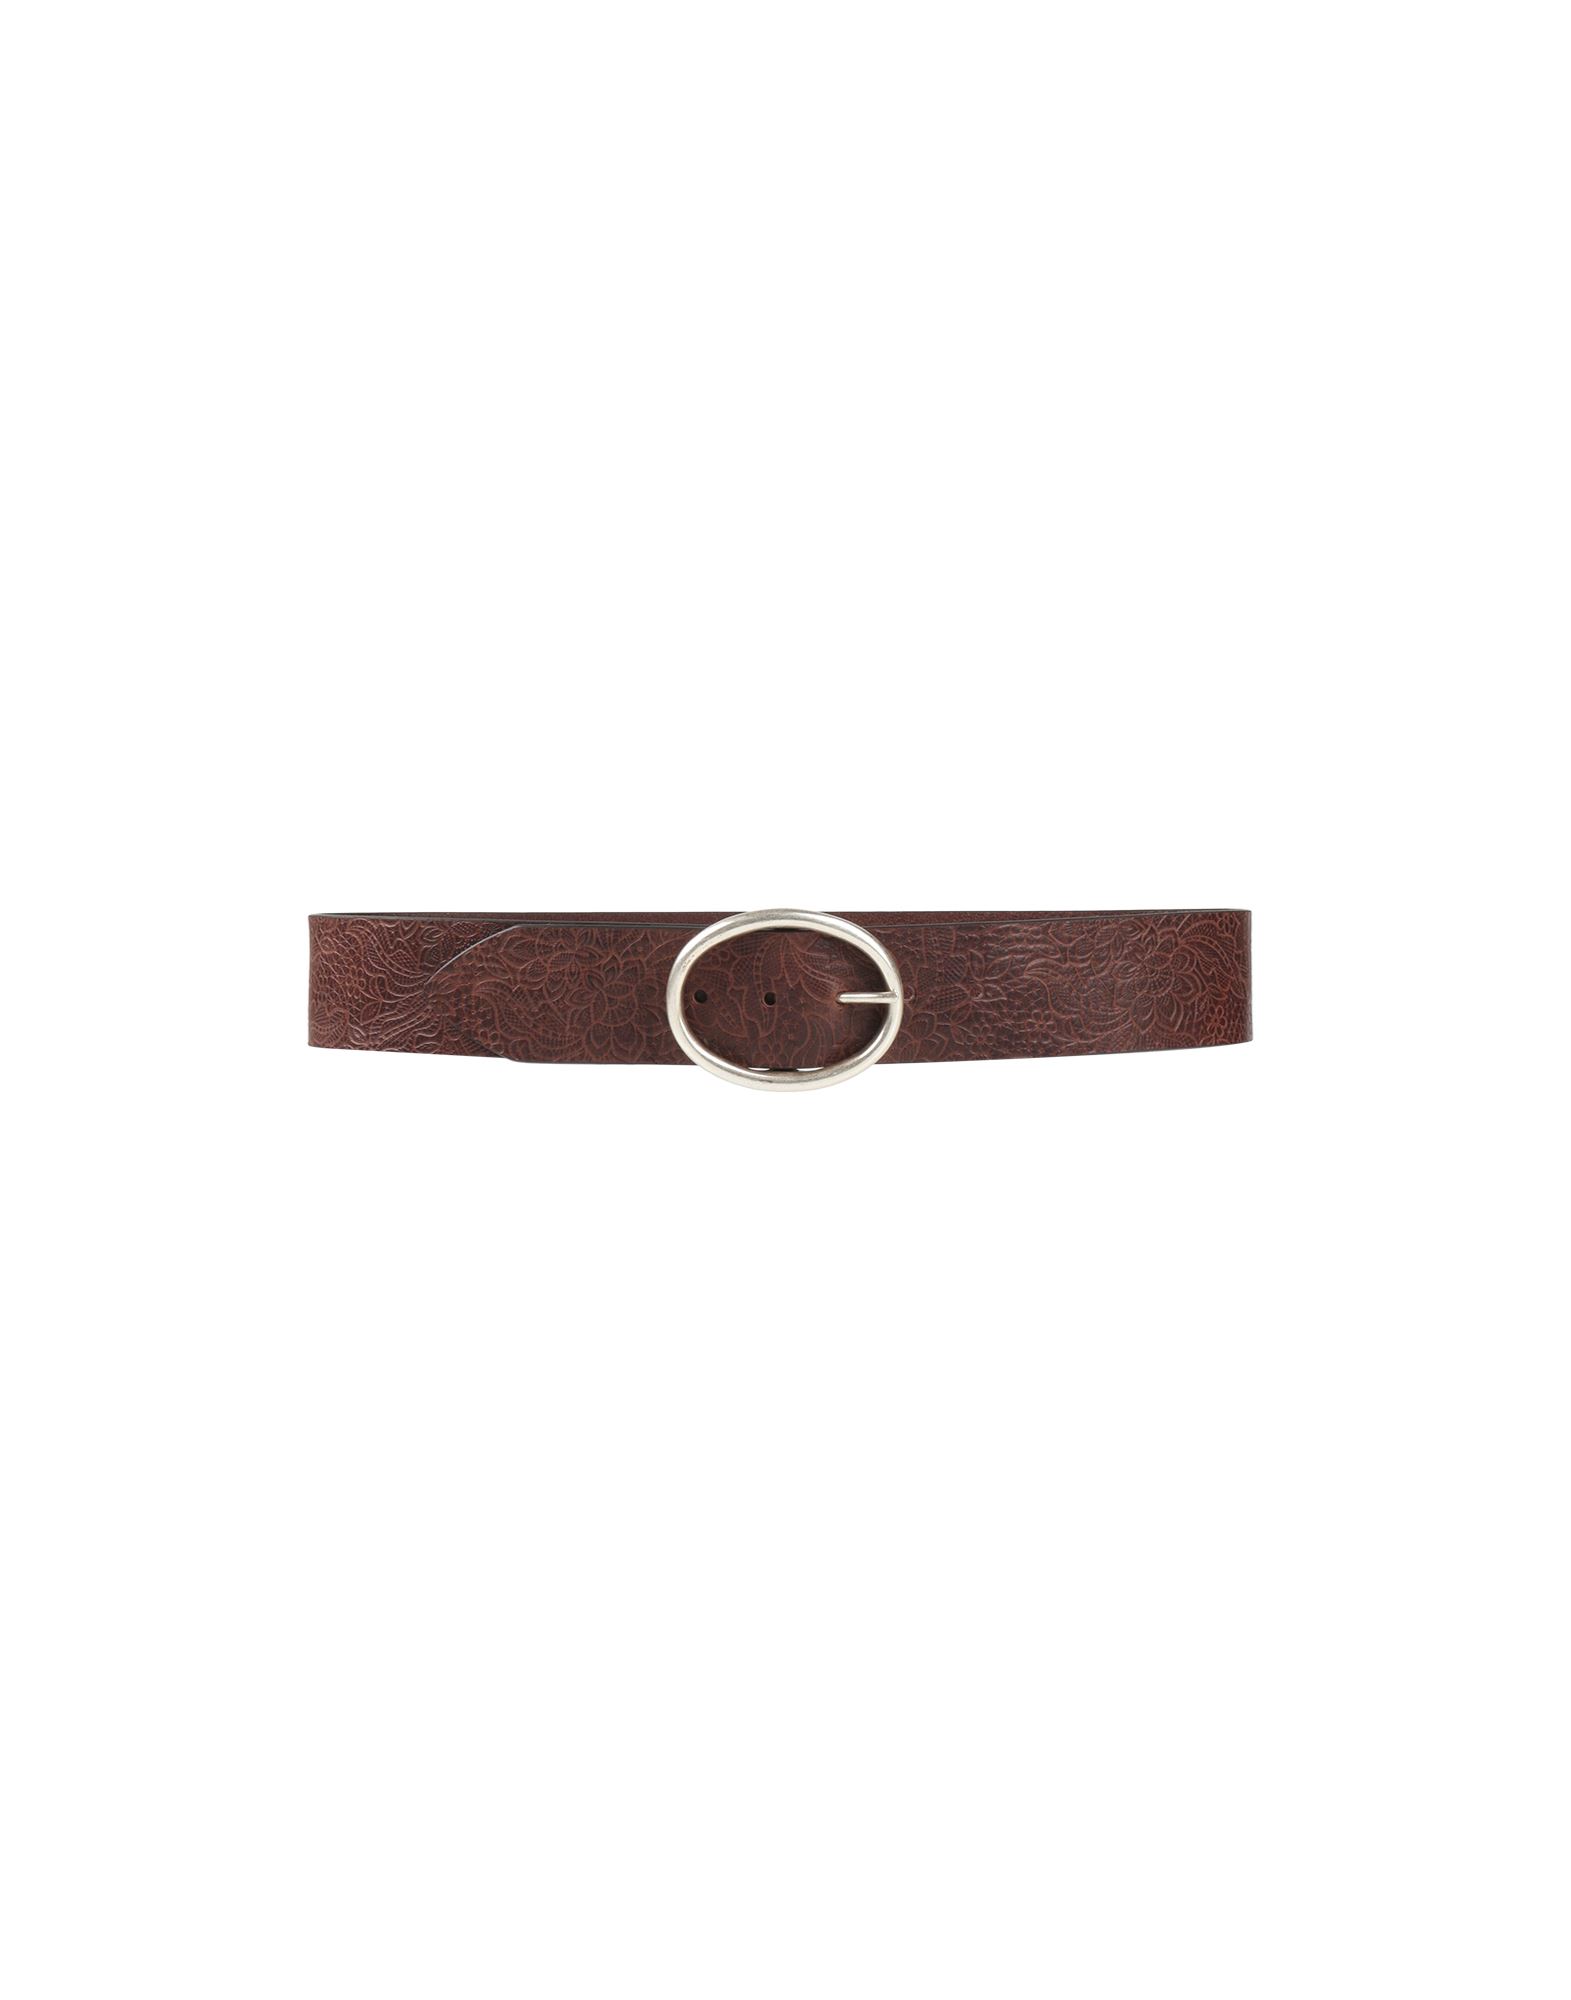 ORCIANI ORCIANI WOMAN BELT DARK BROWN SIZE 39.5 SOFT LEATHER